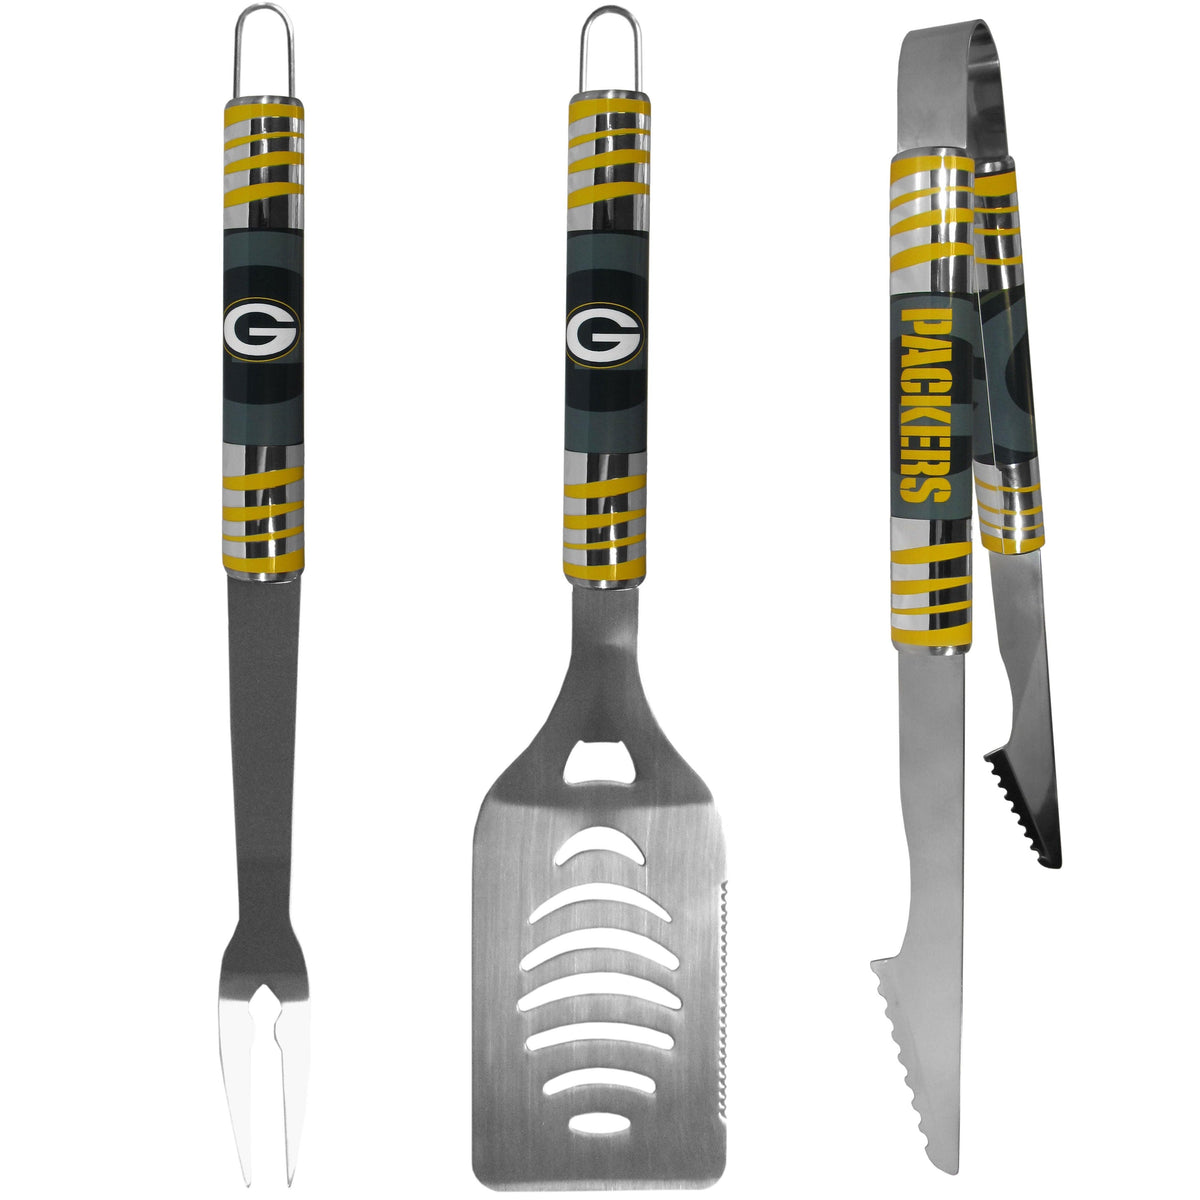 Green Bay Packers 3 pc Tailgater BBQ Set - Flyclothing LLC